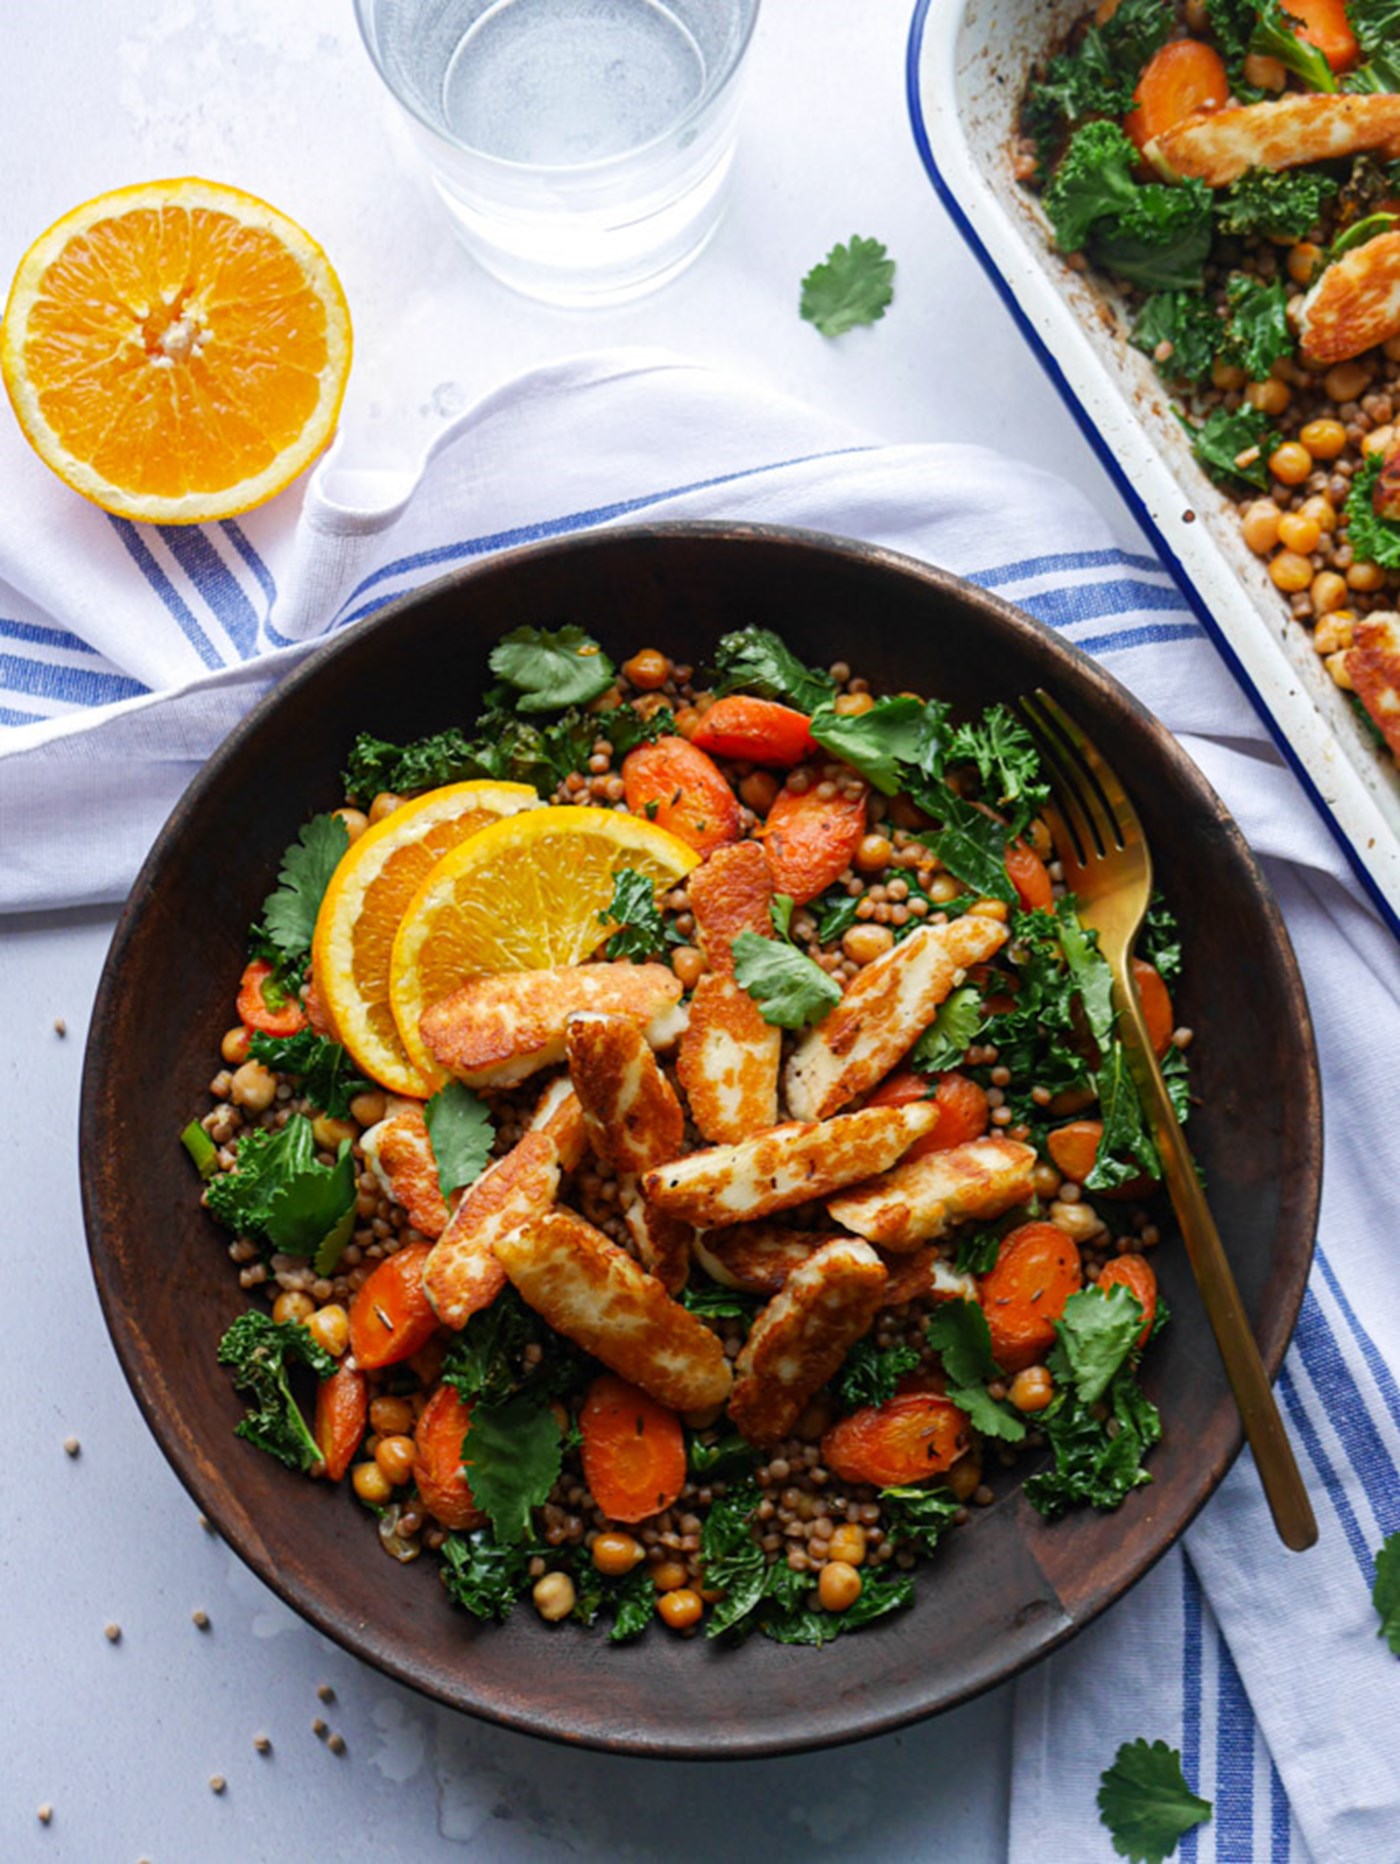 Halloumi Couscous With Chickpeas and Roasted Carrots, Elizabeth Chloe